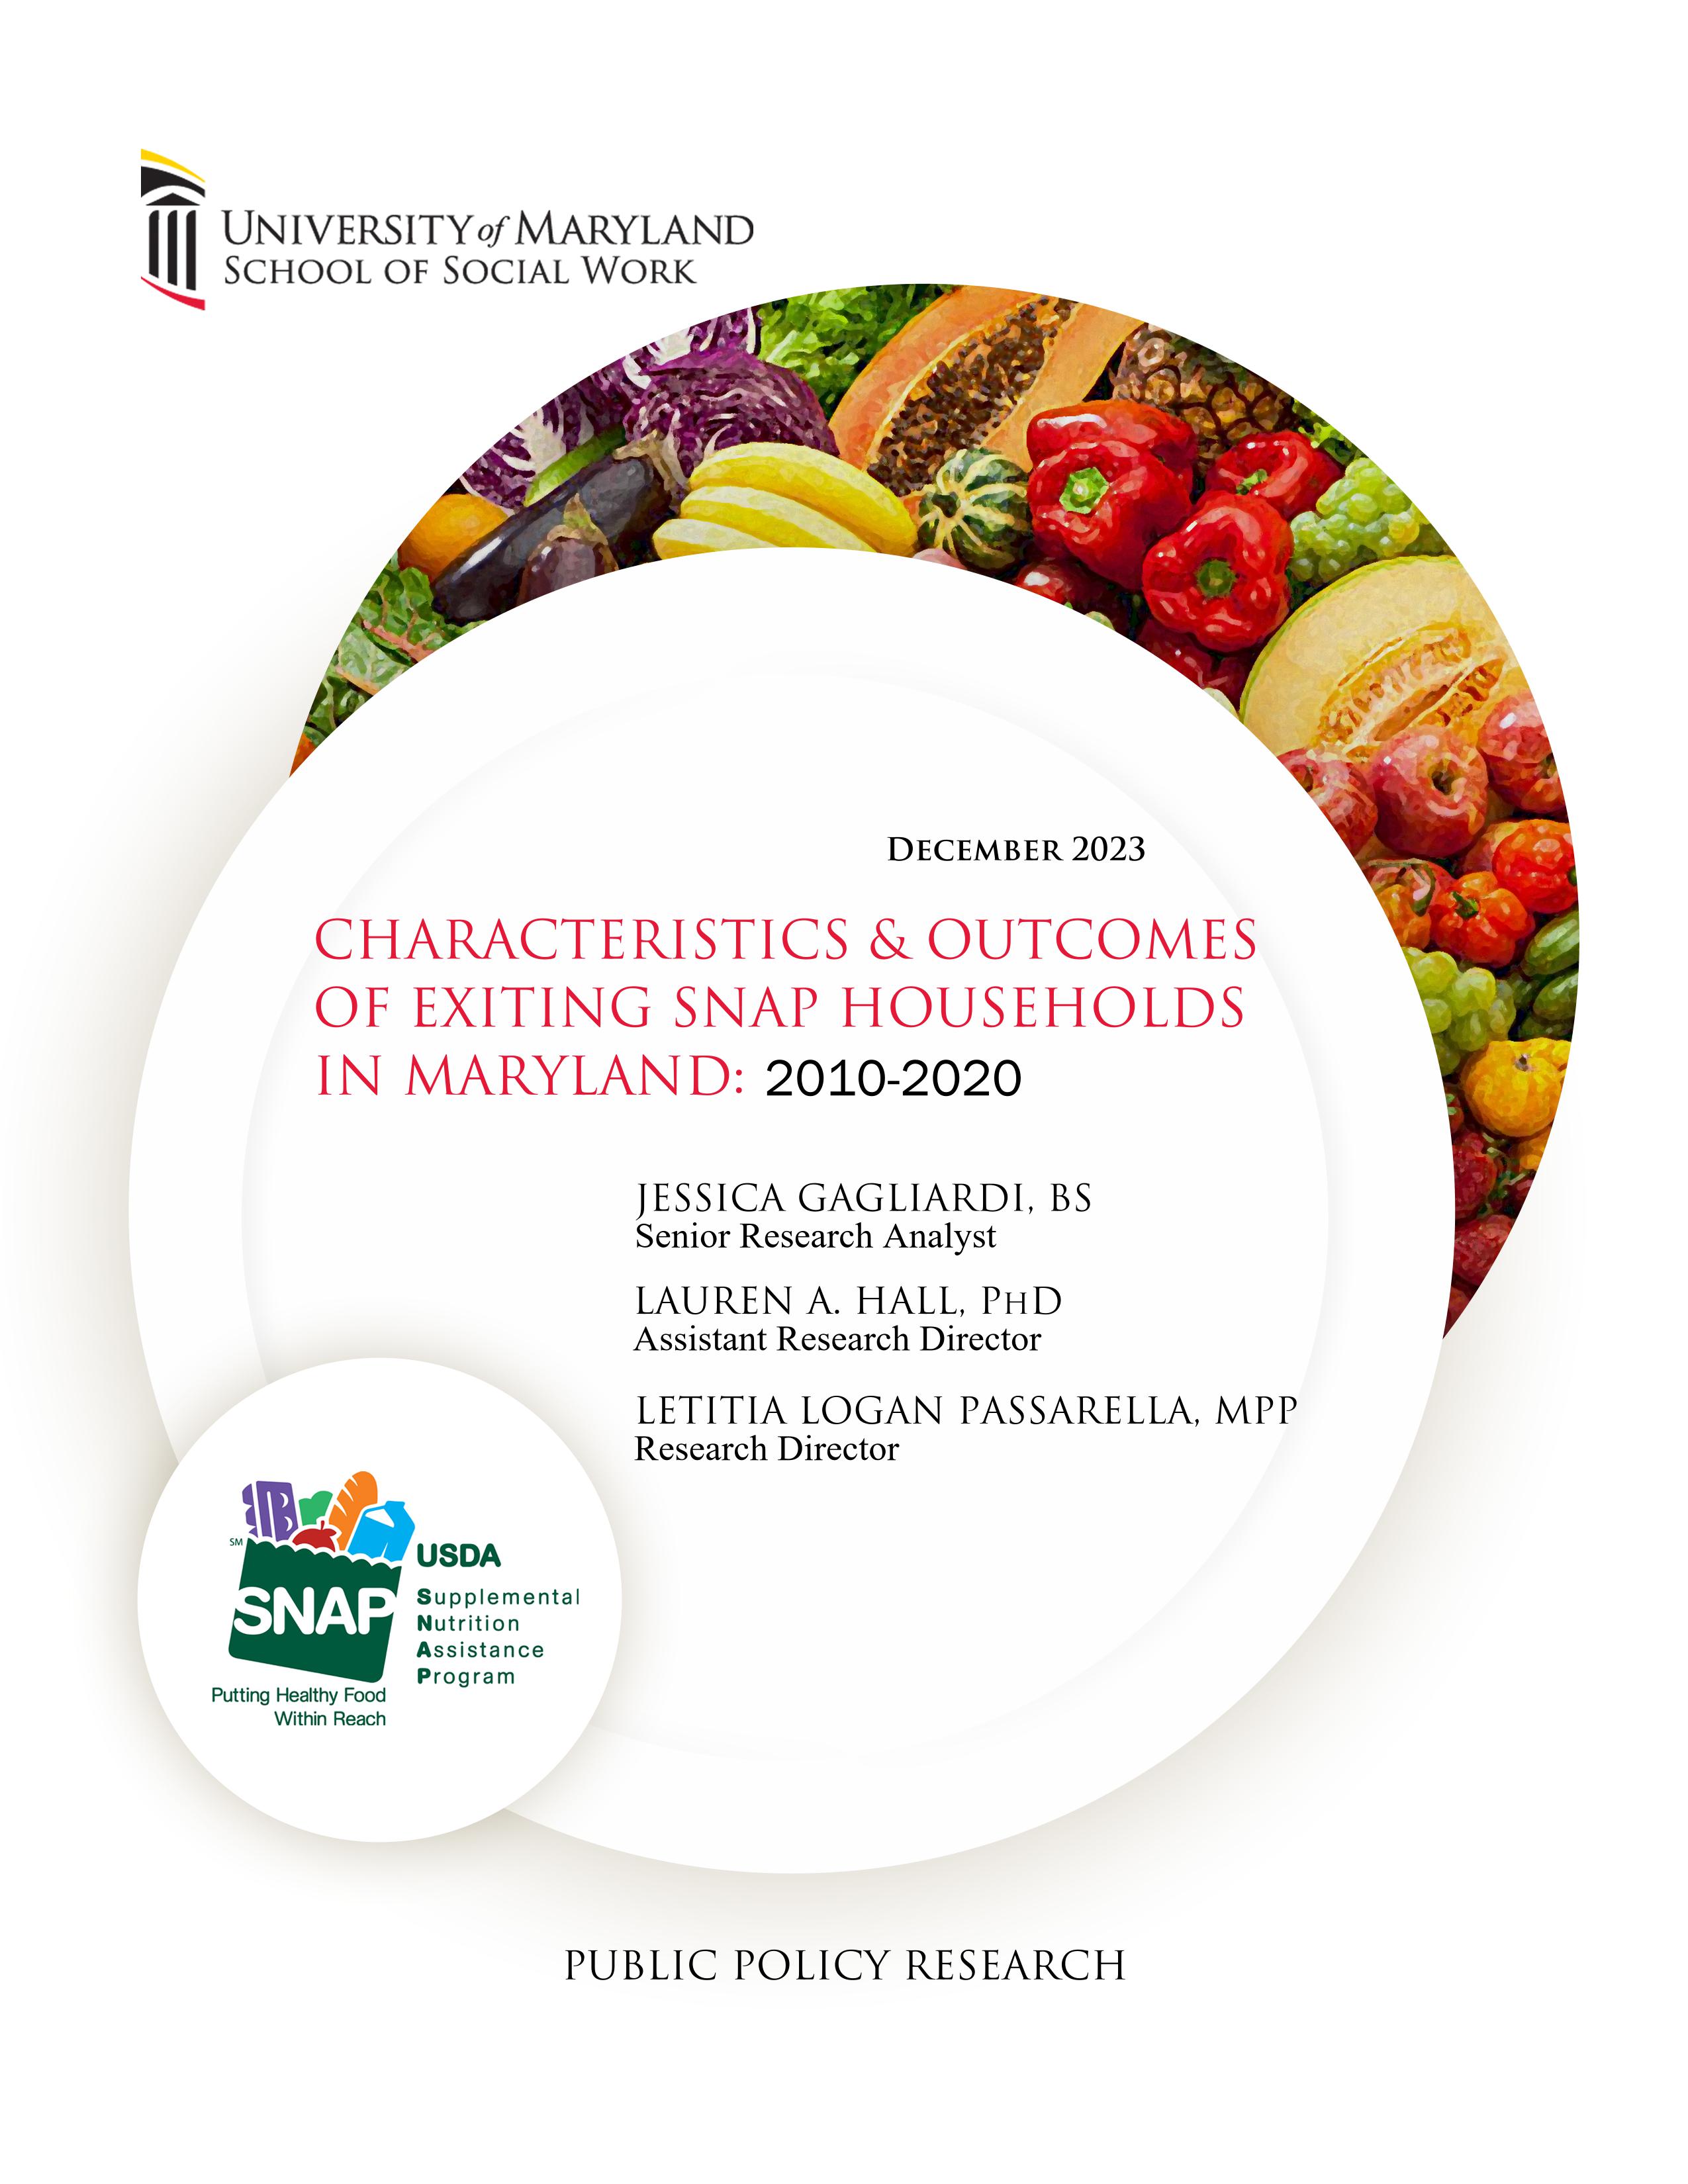 Characteristics and outcomes of exiting SNAP households in Maryland, 2010 through 2020, by Jessica Gagliardi, Lauren A. Hall, Letitia Logan Passarella. University of Maryland School of Social Work